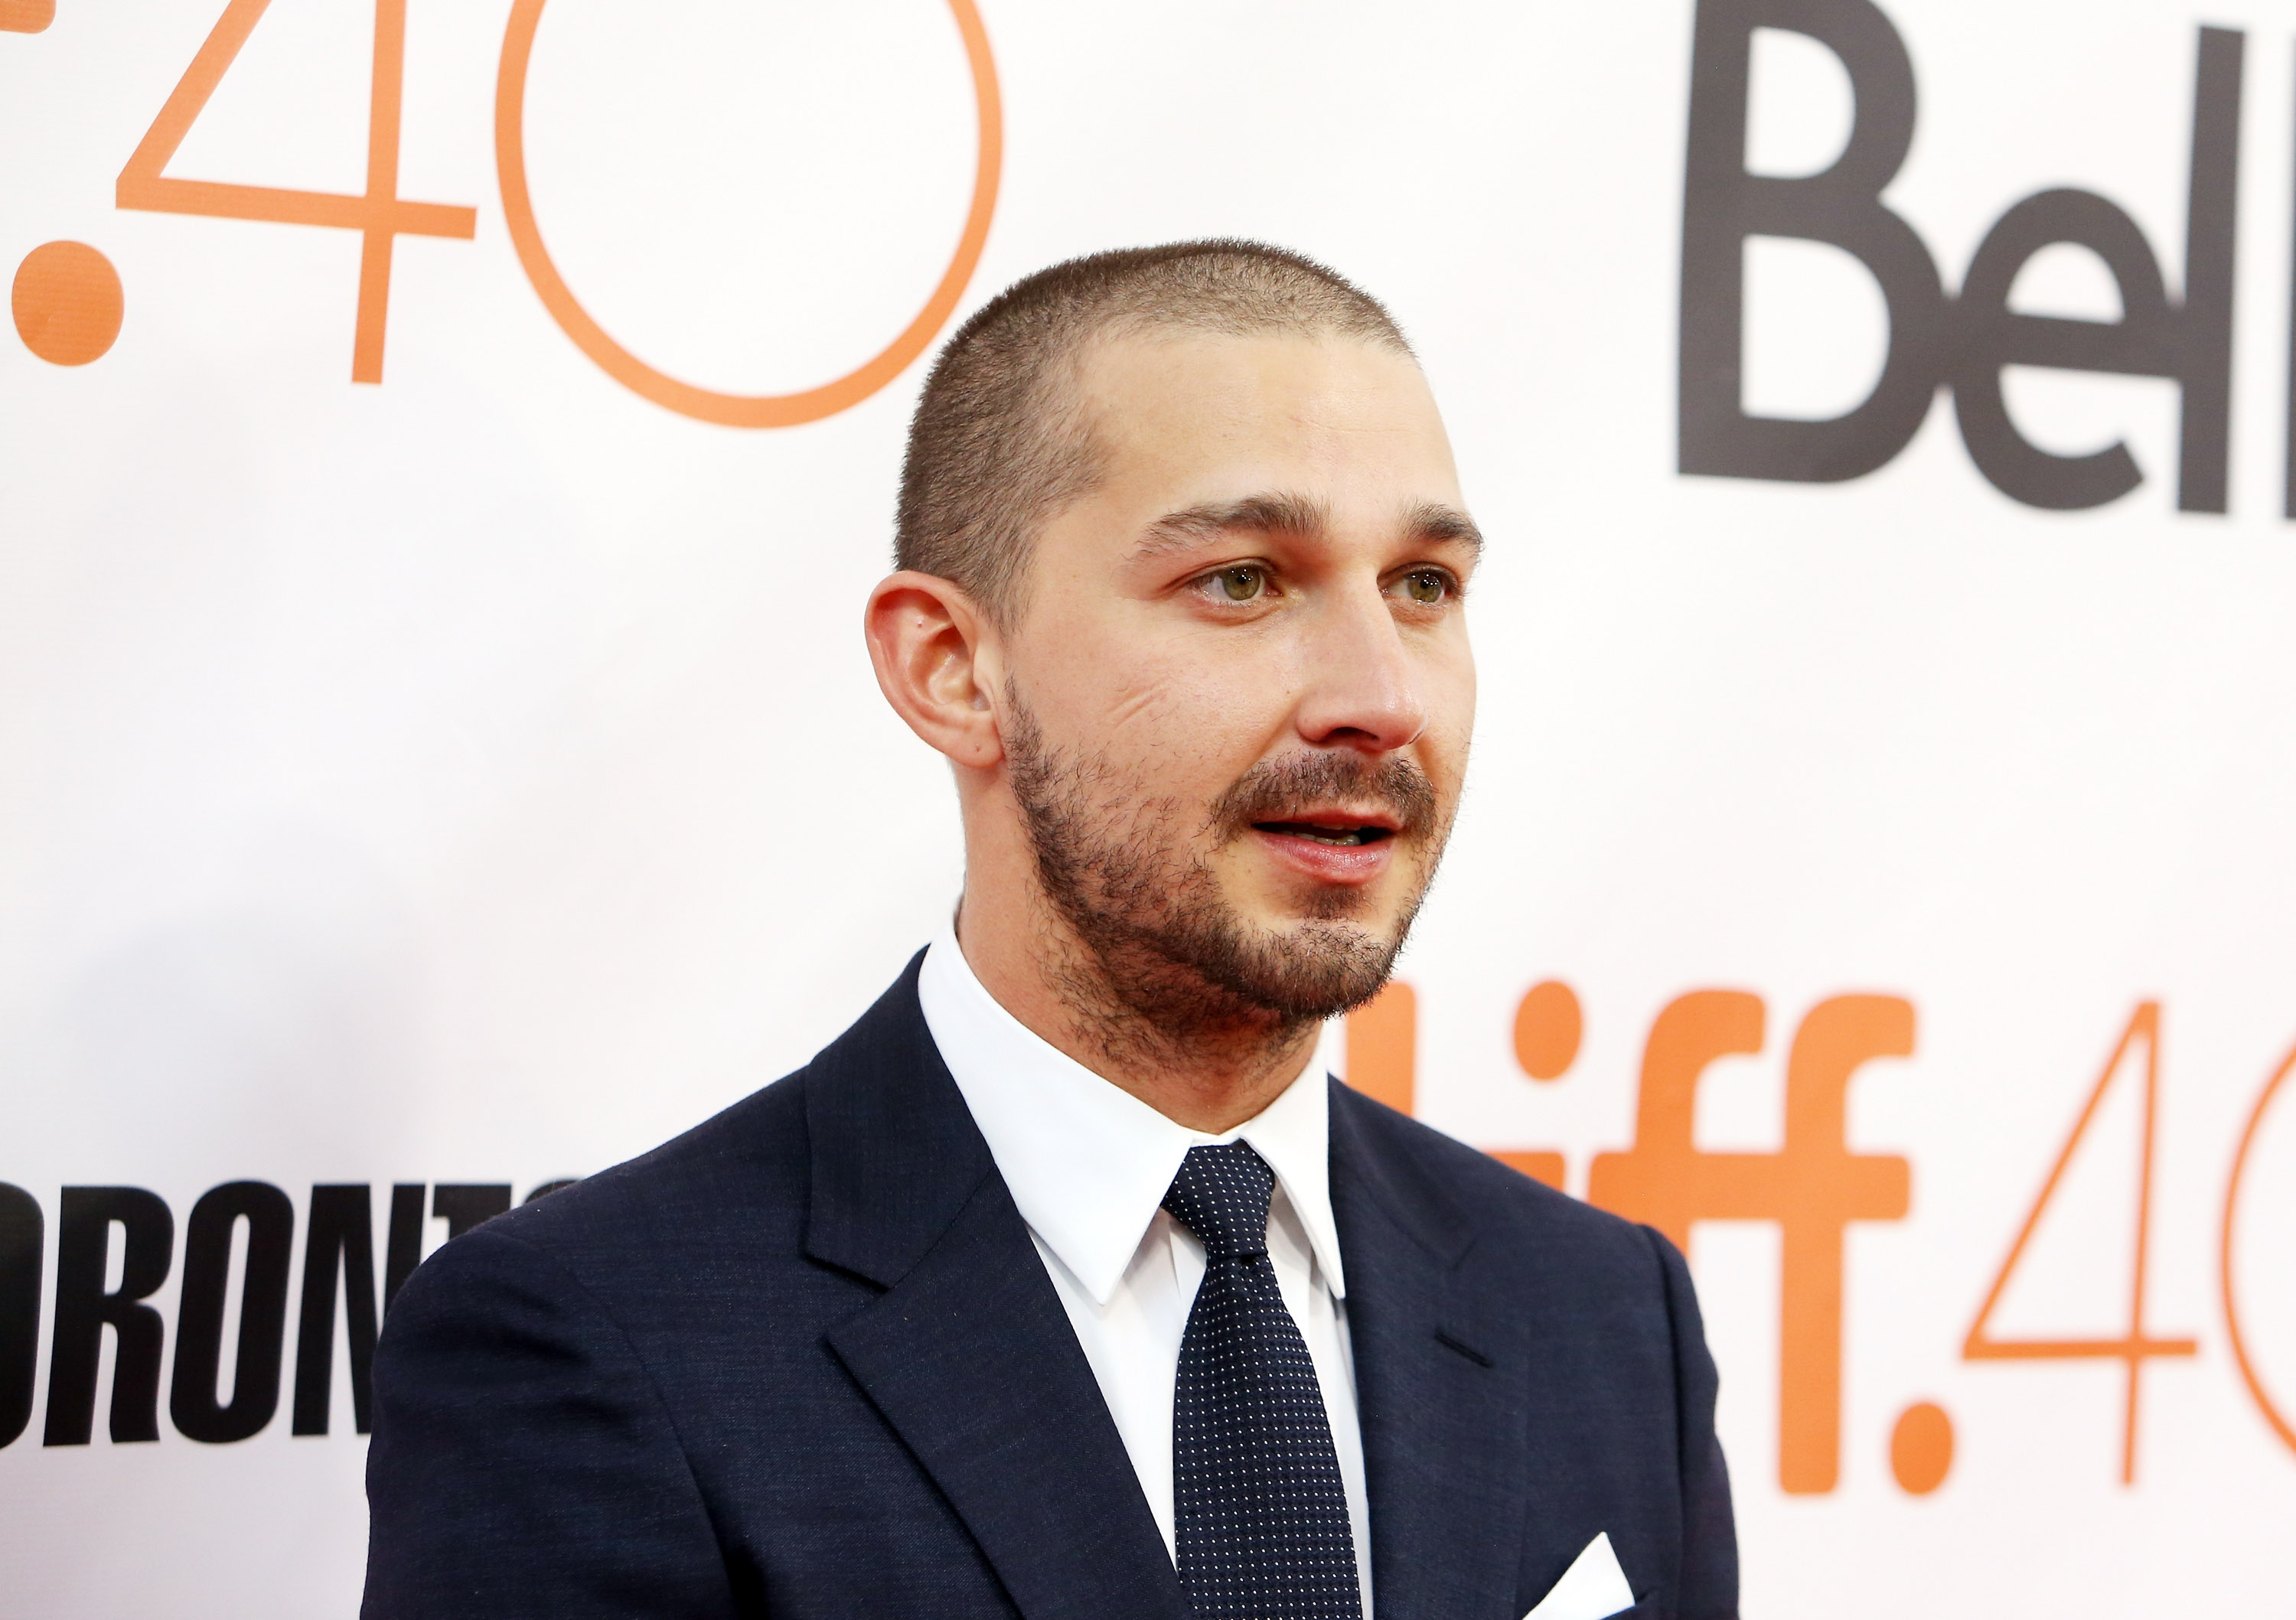 Shia LaBeouf arrives at the "Man Down" premiere during 2015 Toronto International Film Festival held at Roy Thomson Hall on Sept. 15, 2015 in Toronto, Canada. (Michael Tran—Getty Images)